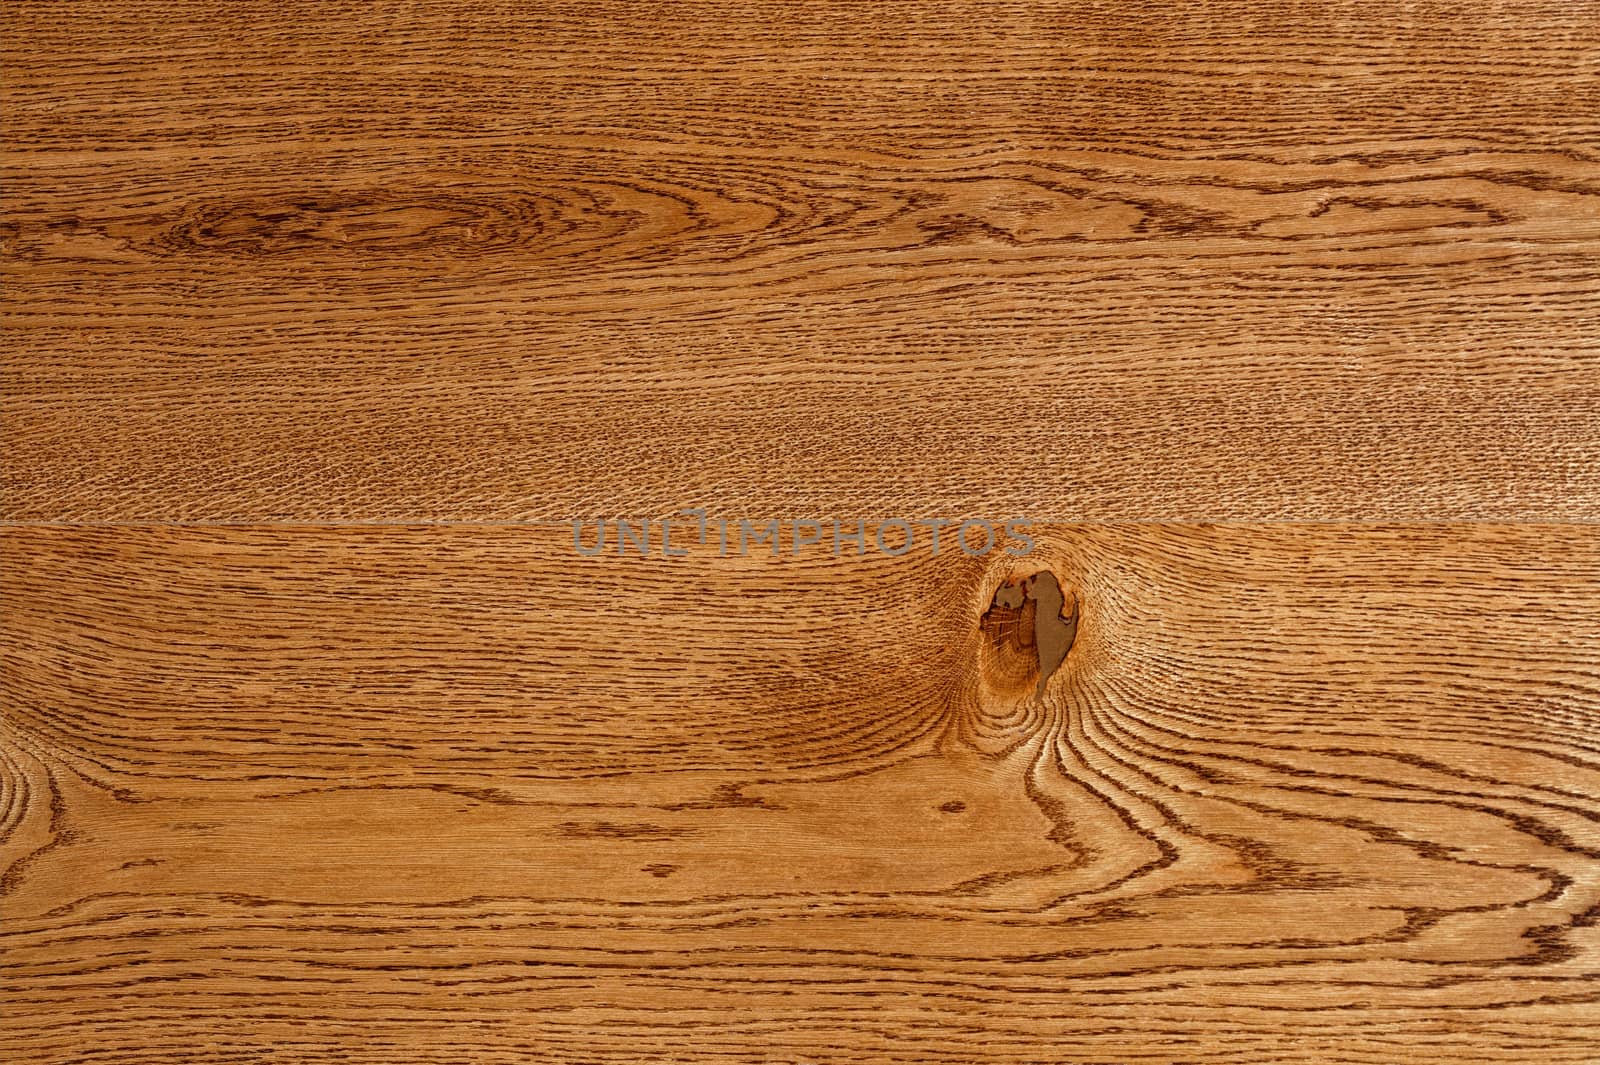 A beautiful pattern of oak wood grain in the form of a smooth wooden surface with horizontal lines.